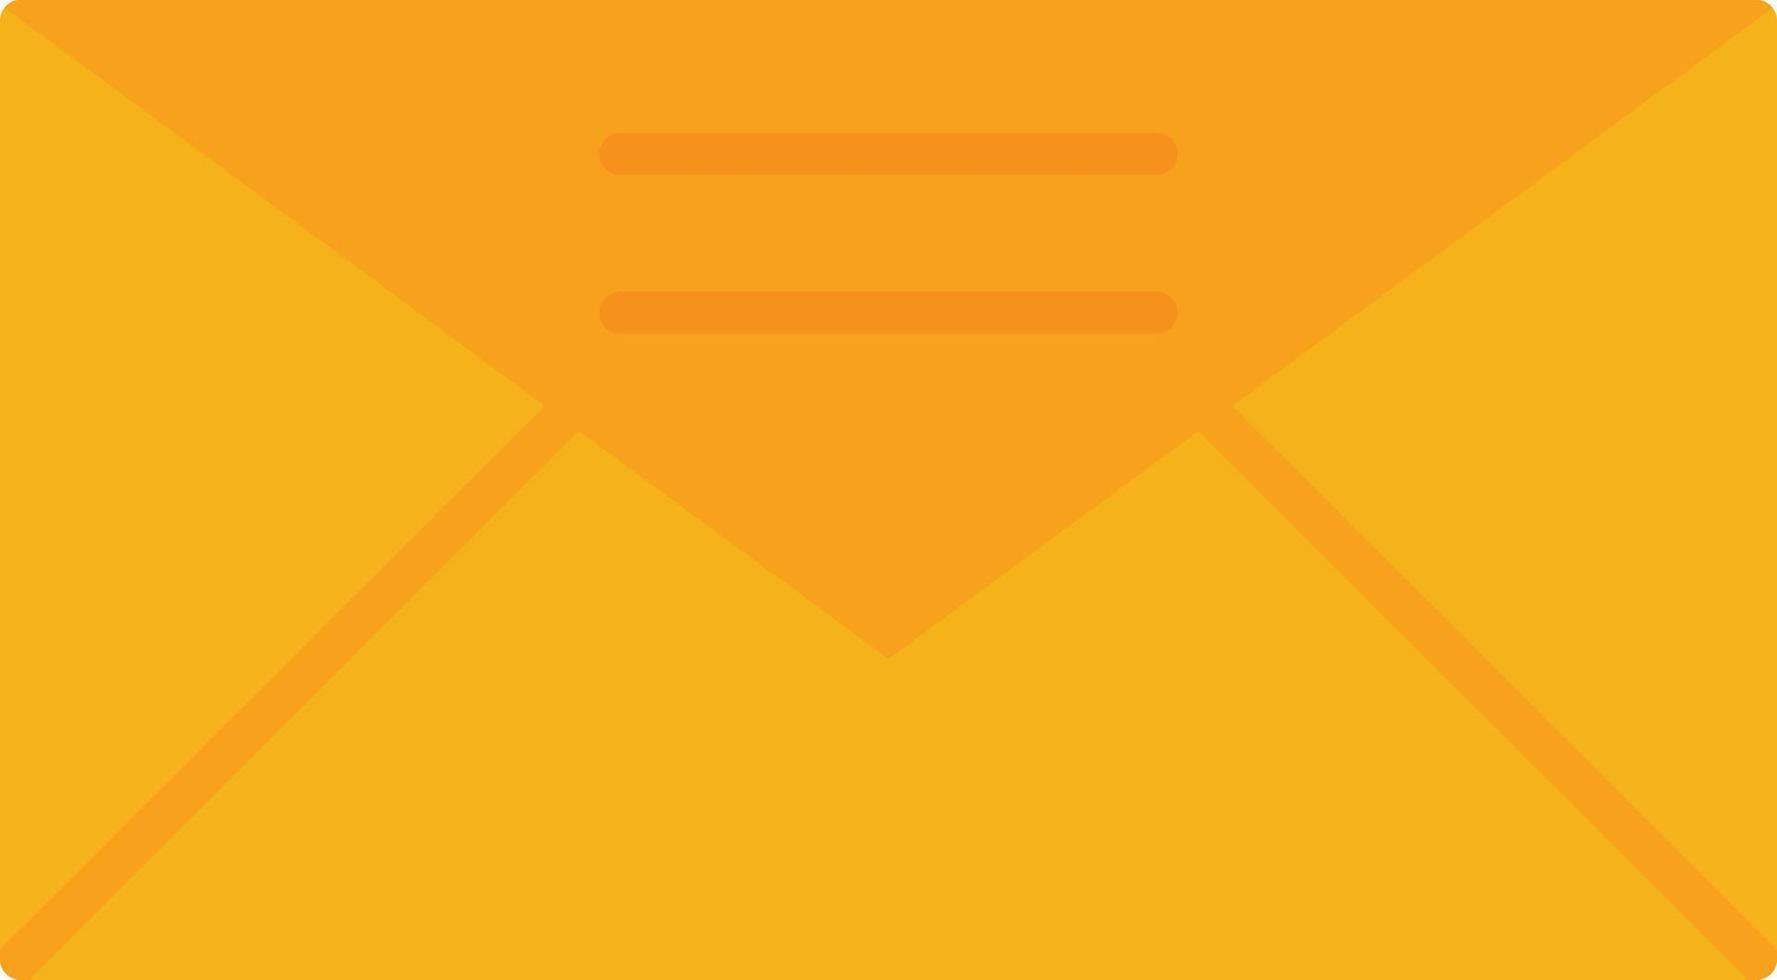 Mail Flat Icon vector